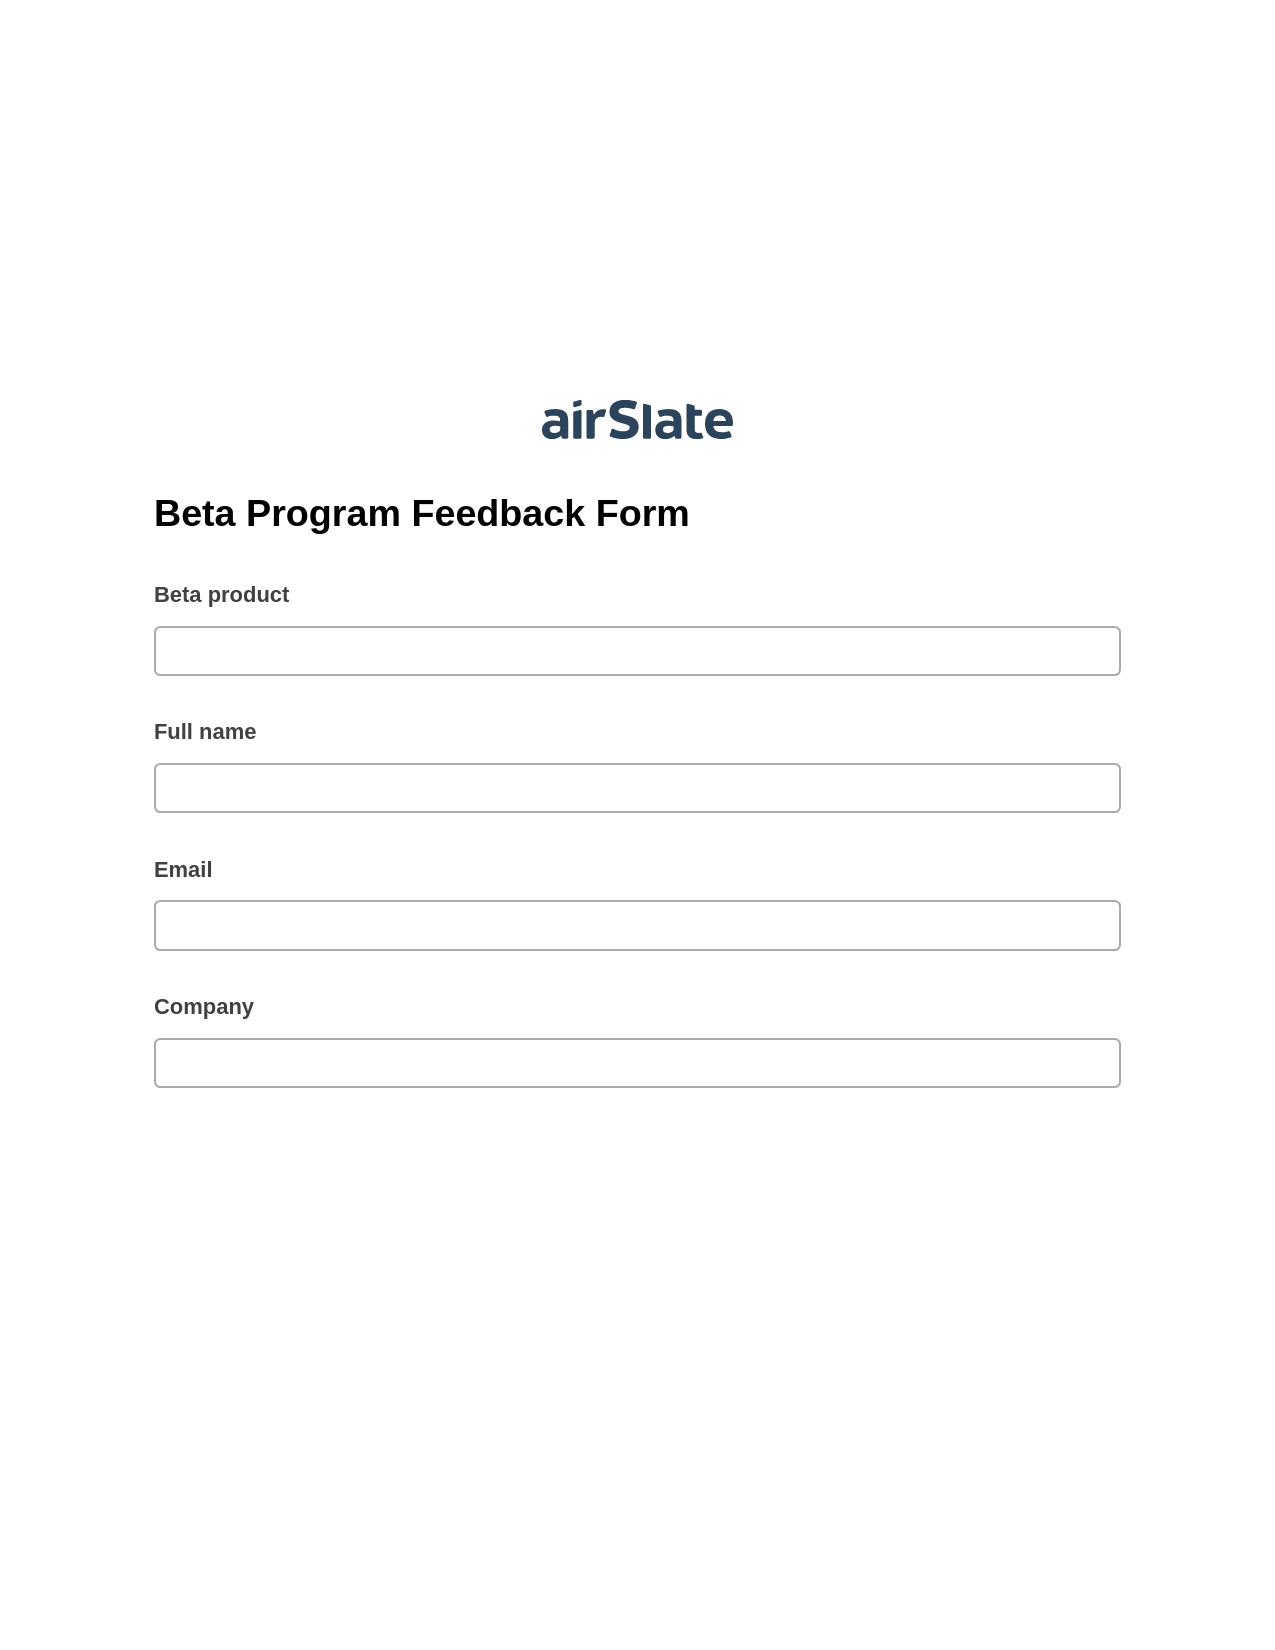 Beta Program Feedback Form Pre-fill Dropdown from Airtable, Create Salesforce Record Bot, Export to Excel 365 Bot